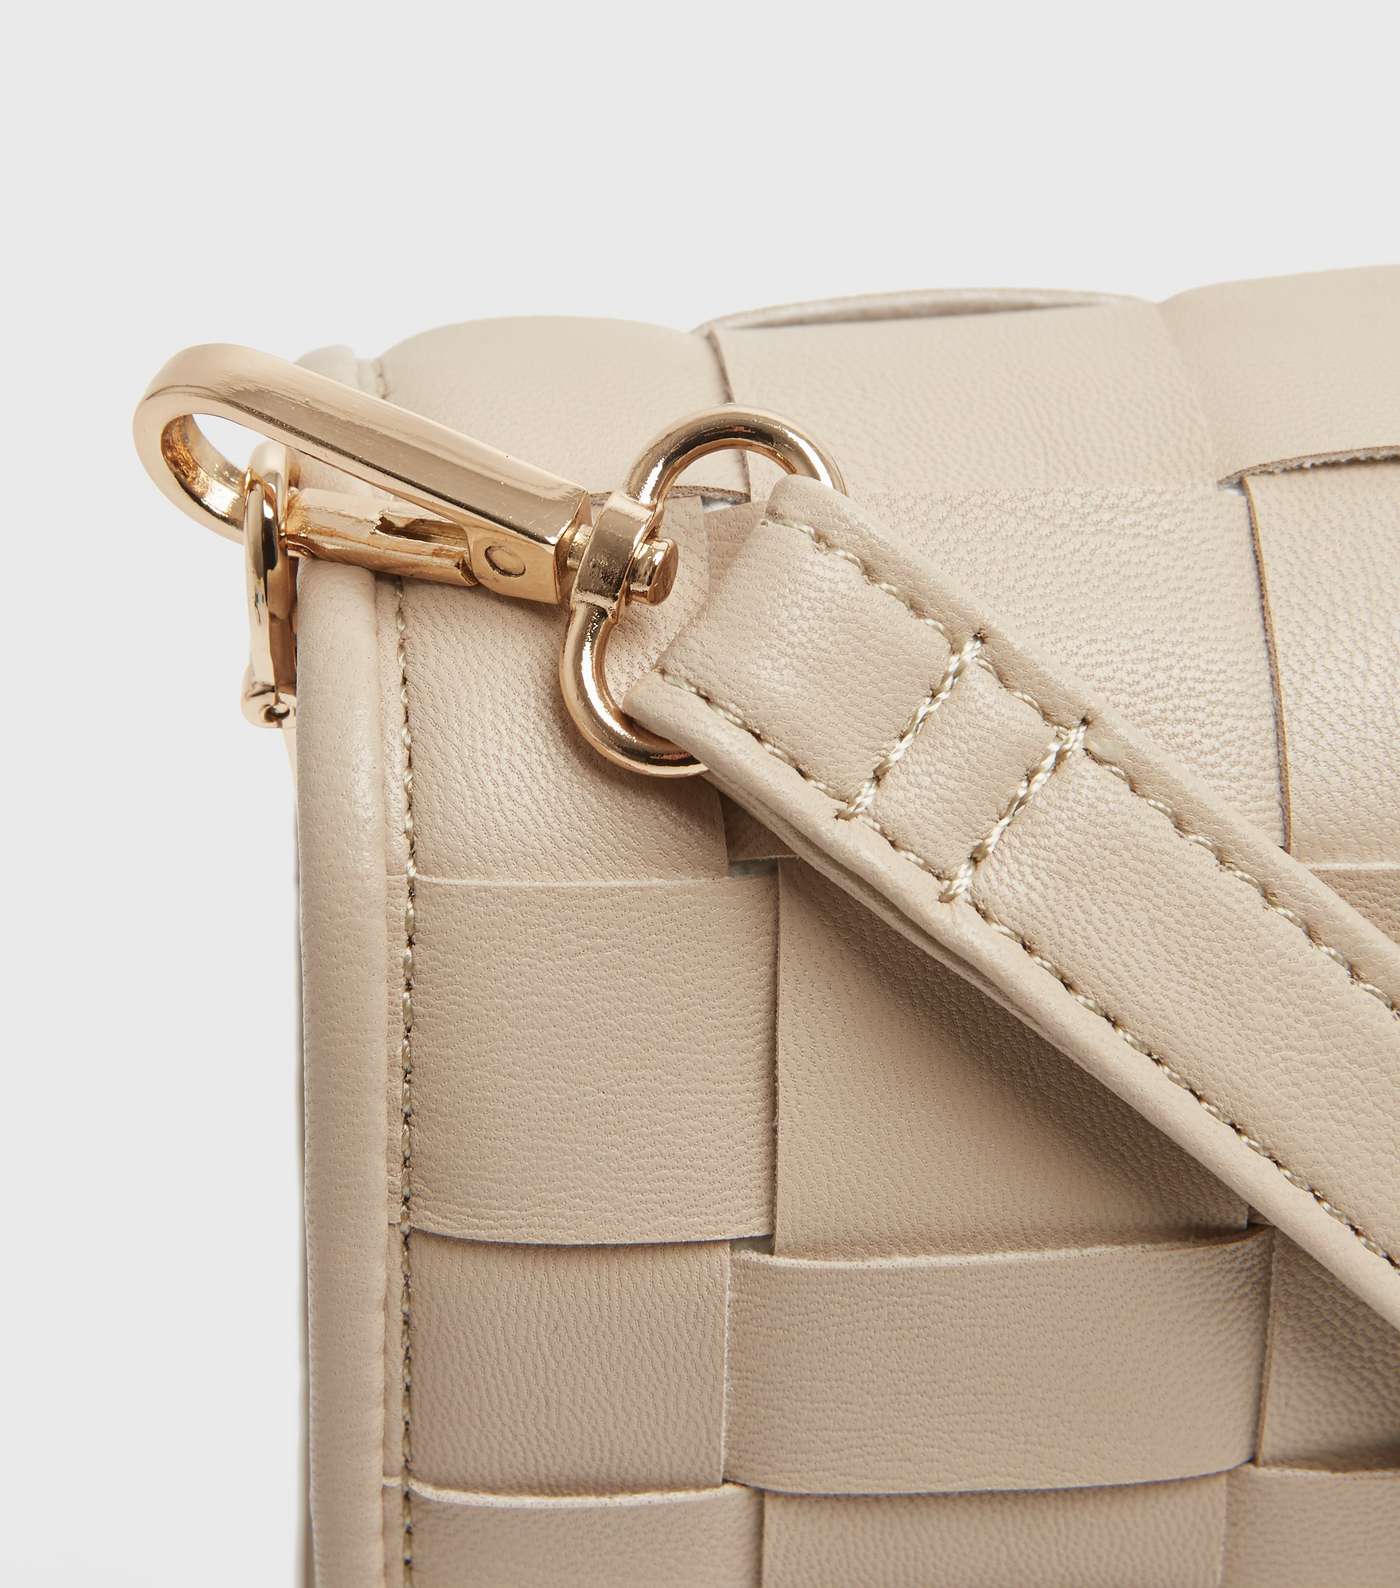 Off White Leather-Look Woven Cross Body Bag  Image 3